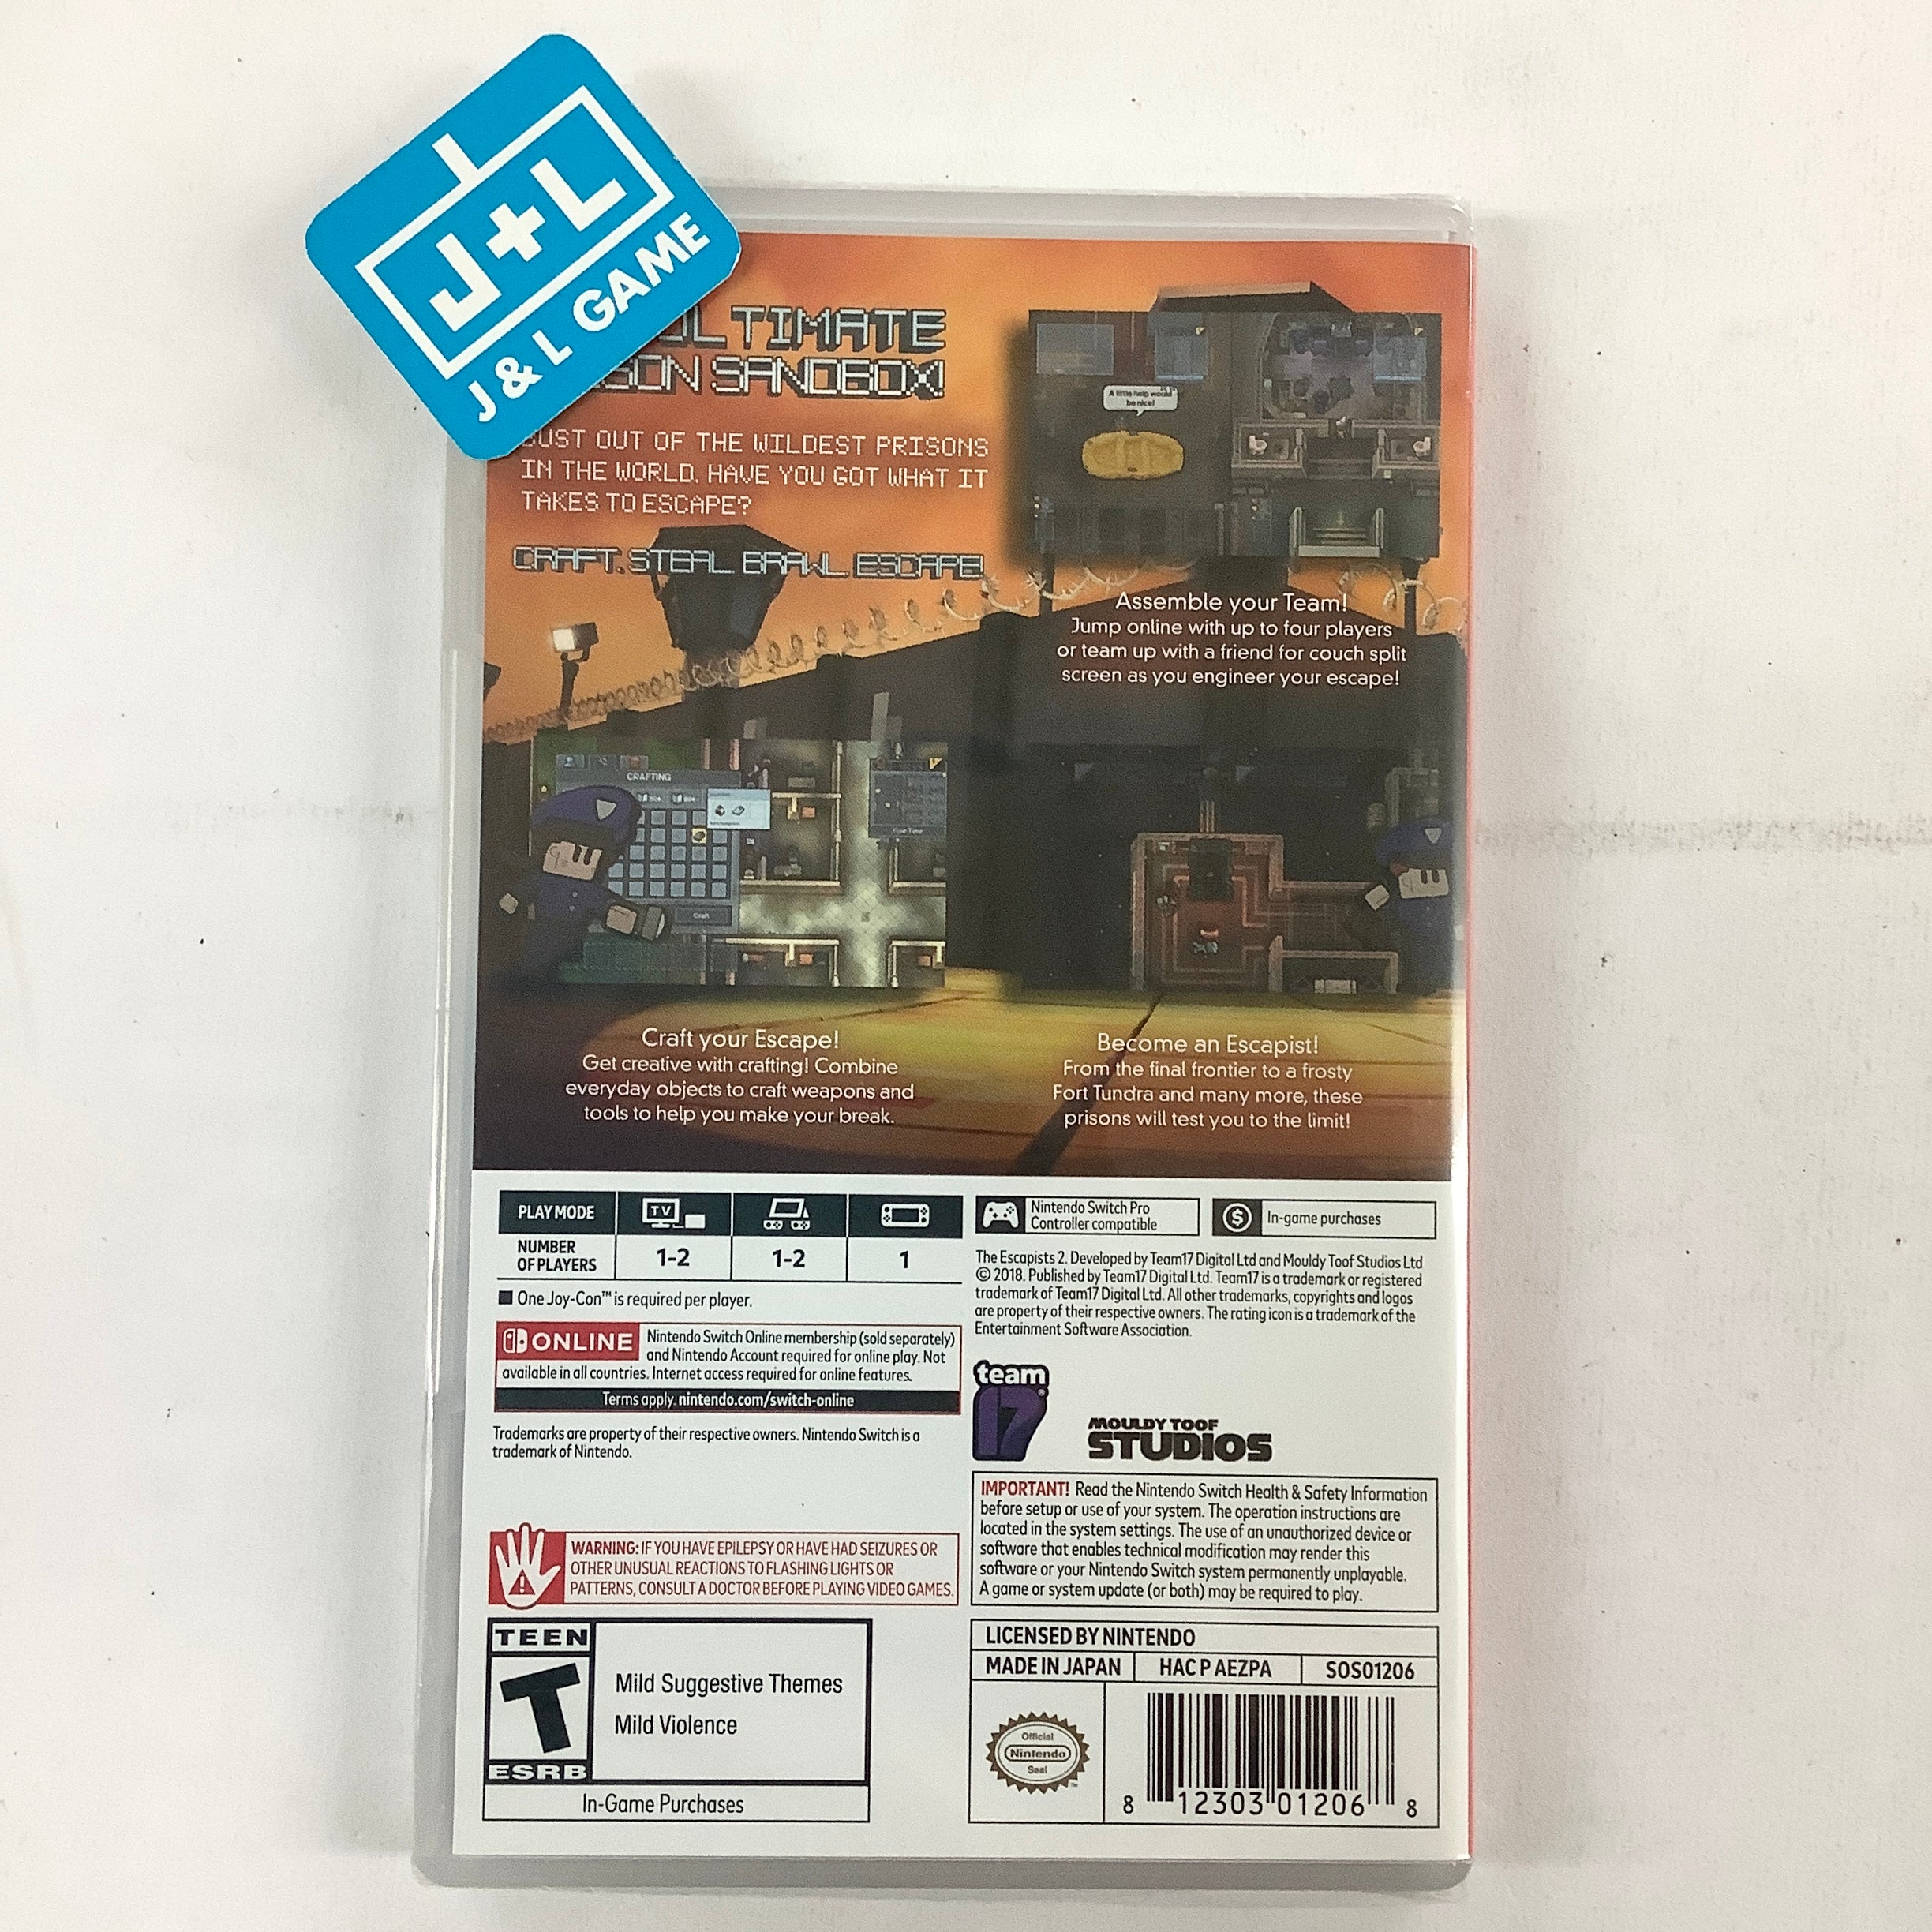 The Escapists 2 - (NSW) Nintendo Switch Video Games Sold Out   